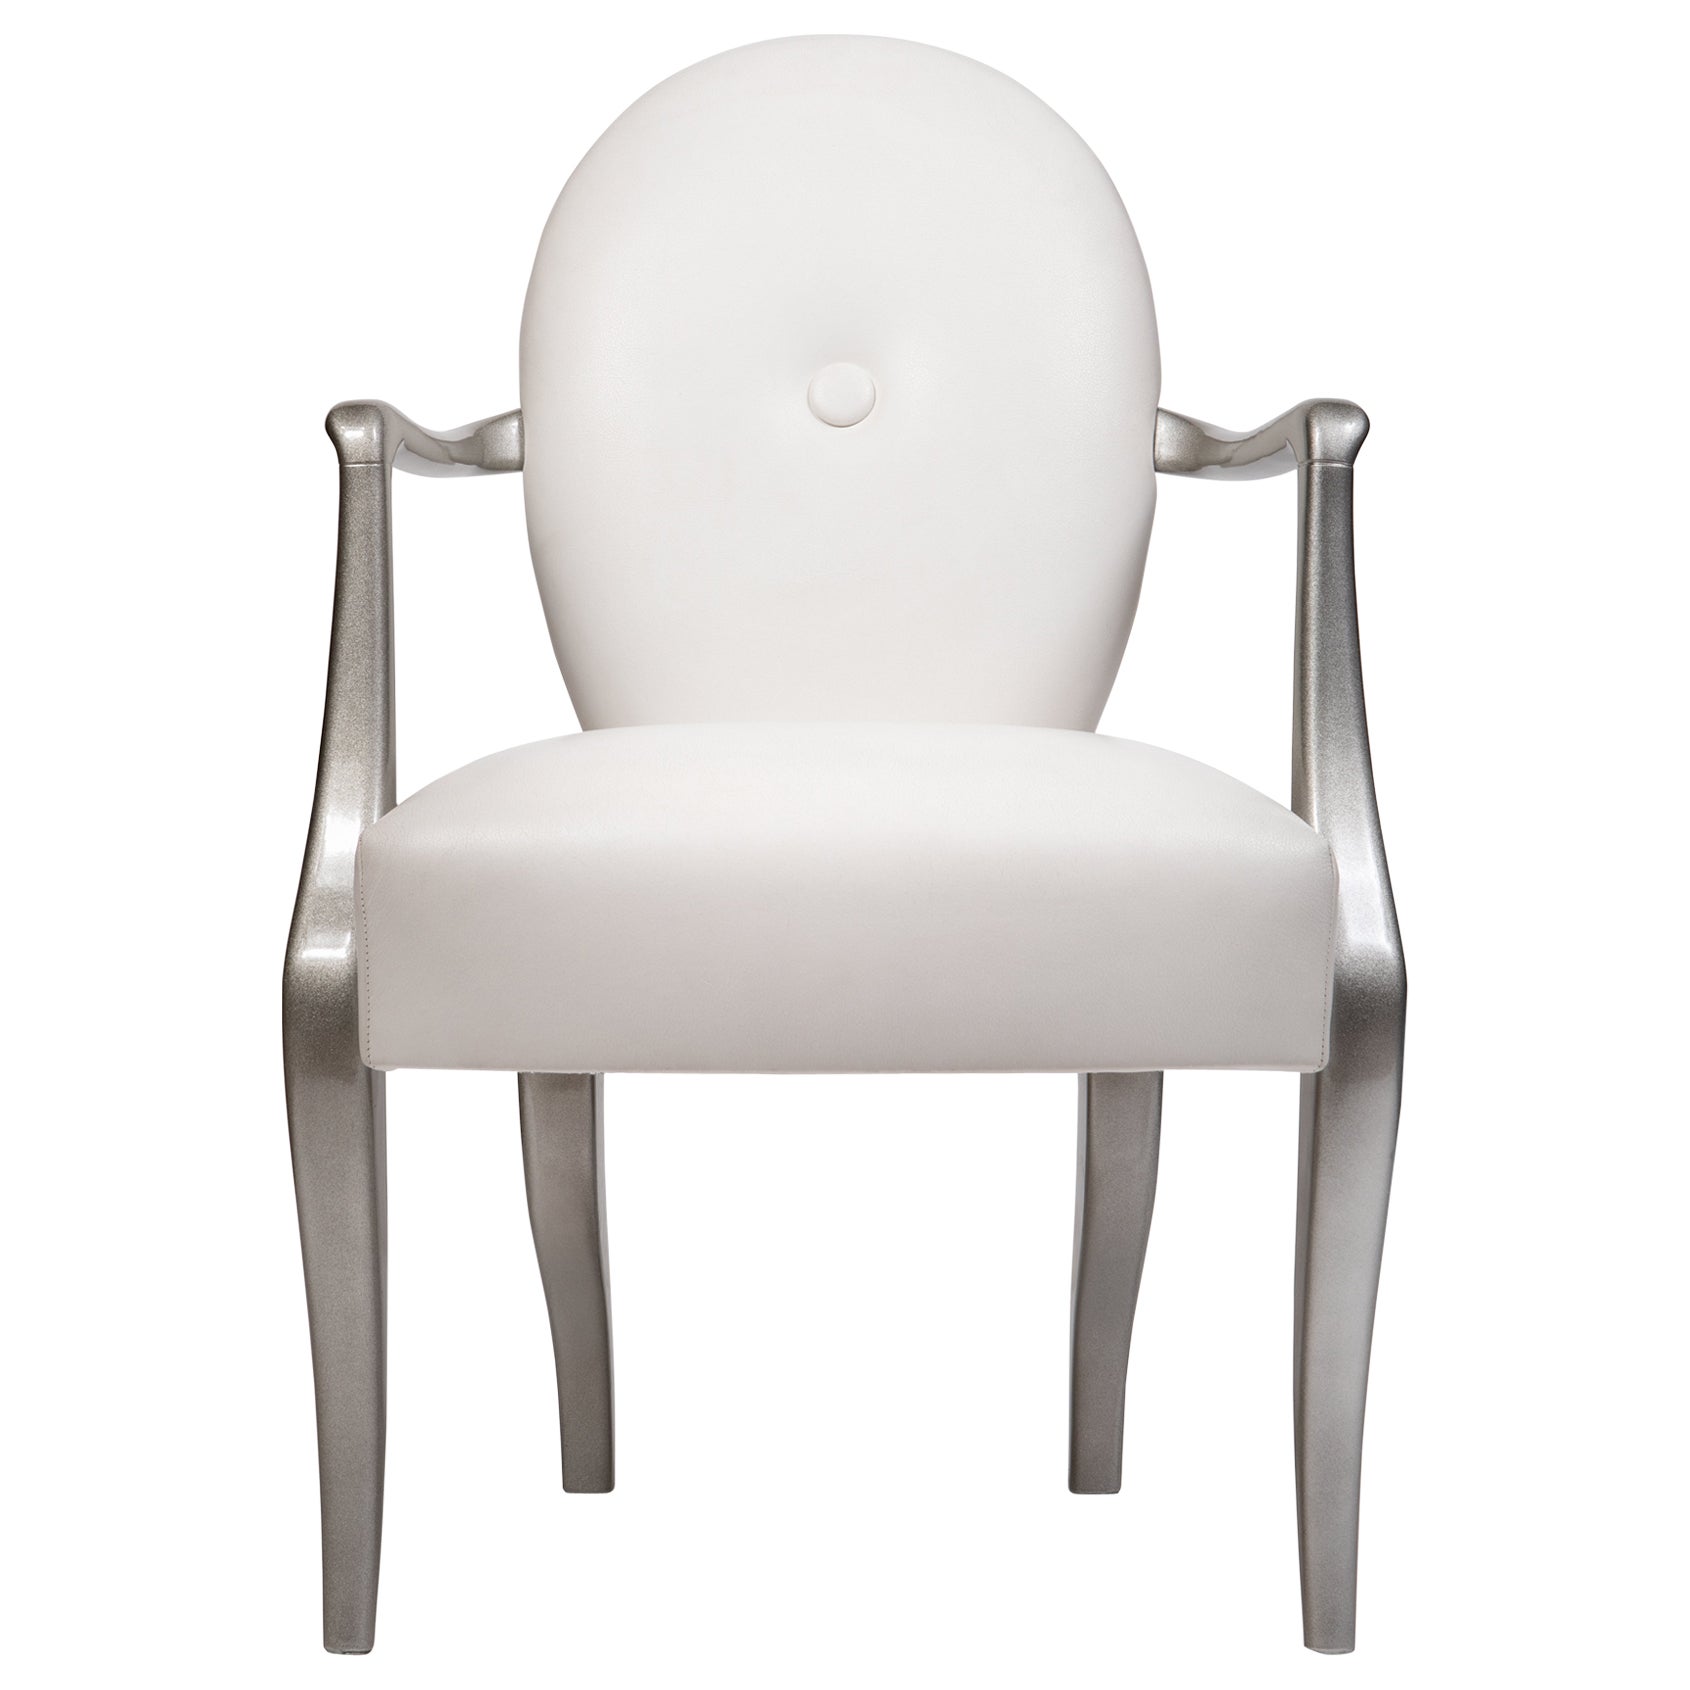 Contemporary Chair with Armrests, Wood Frame, Made in Italy